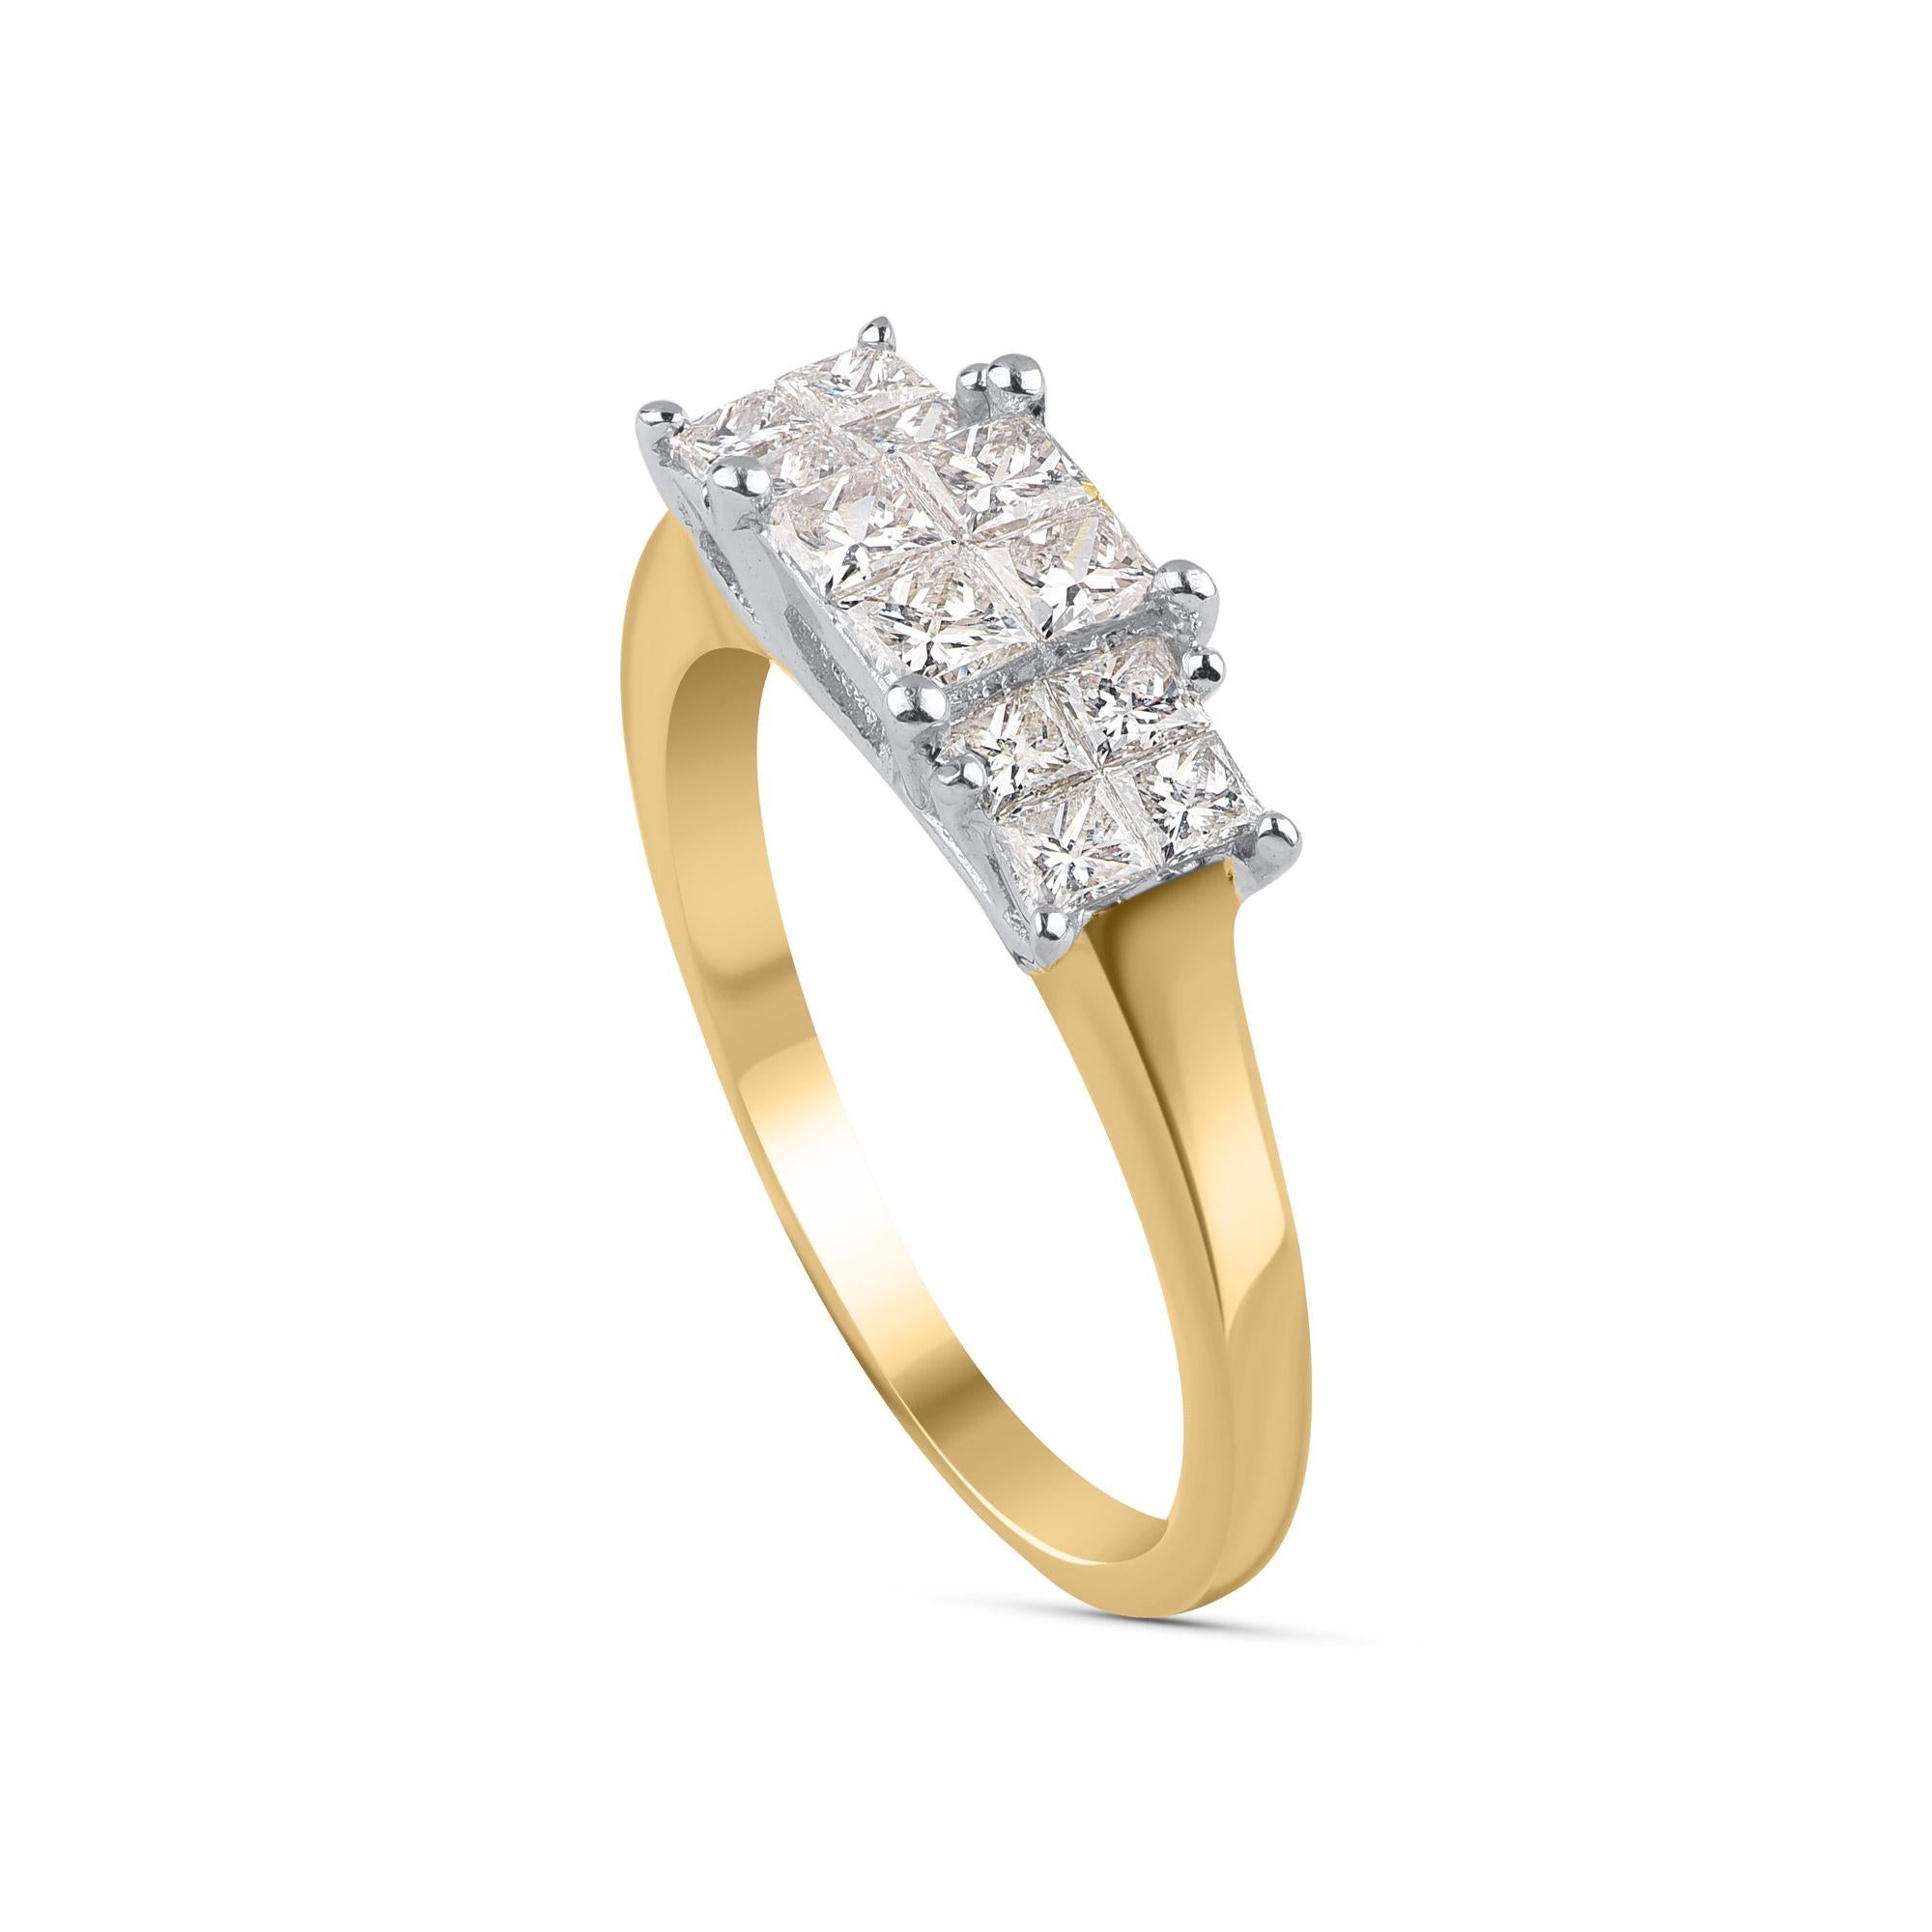 This diamond studded ring will add an extra charm to your ring collection. Glitters with 12 princess-cut natural diamonds elegantly set in invisible setting and fashion ed in 18 kt white & yellow gold. Diamonds are graded H-I Color, I1 Clarity. 
